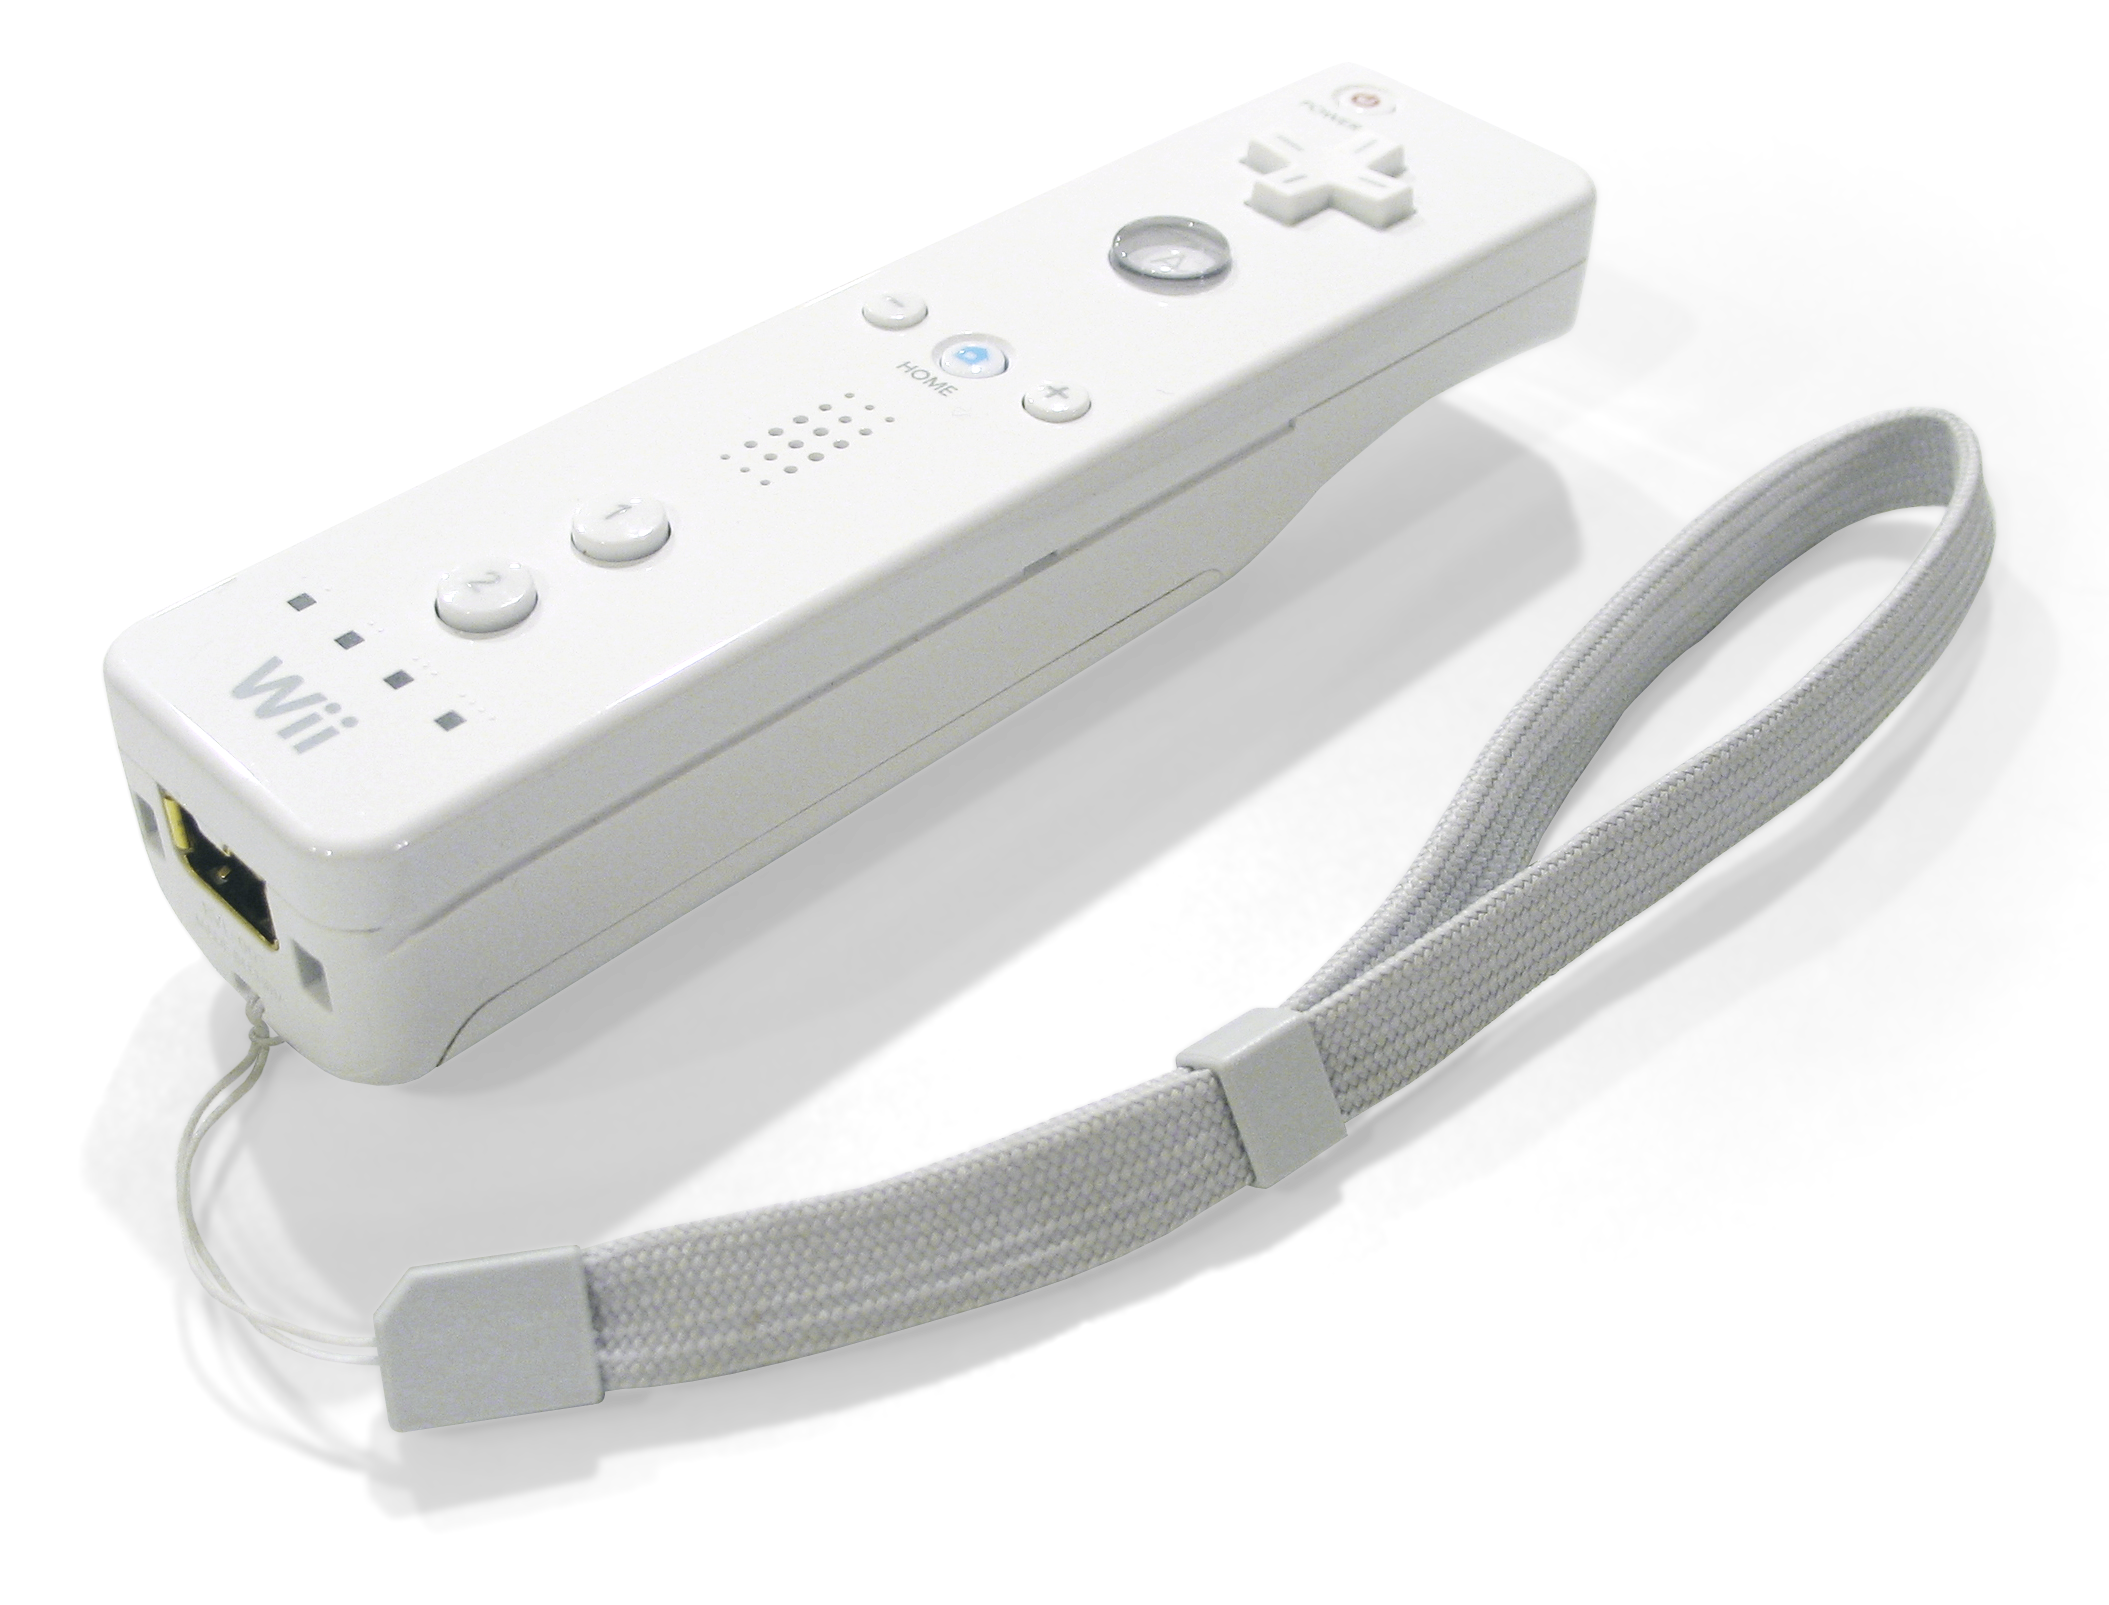 http://upload.wikimedia.org/wikipedia/commons/a/a9/Wiimote.png